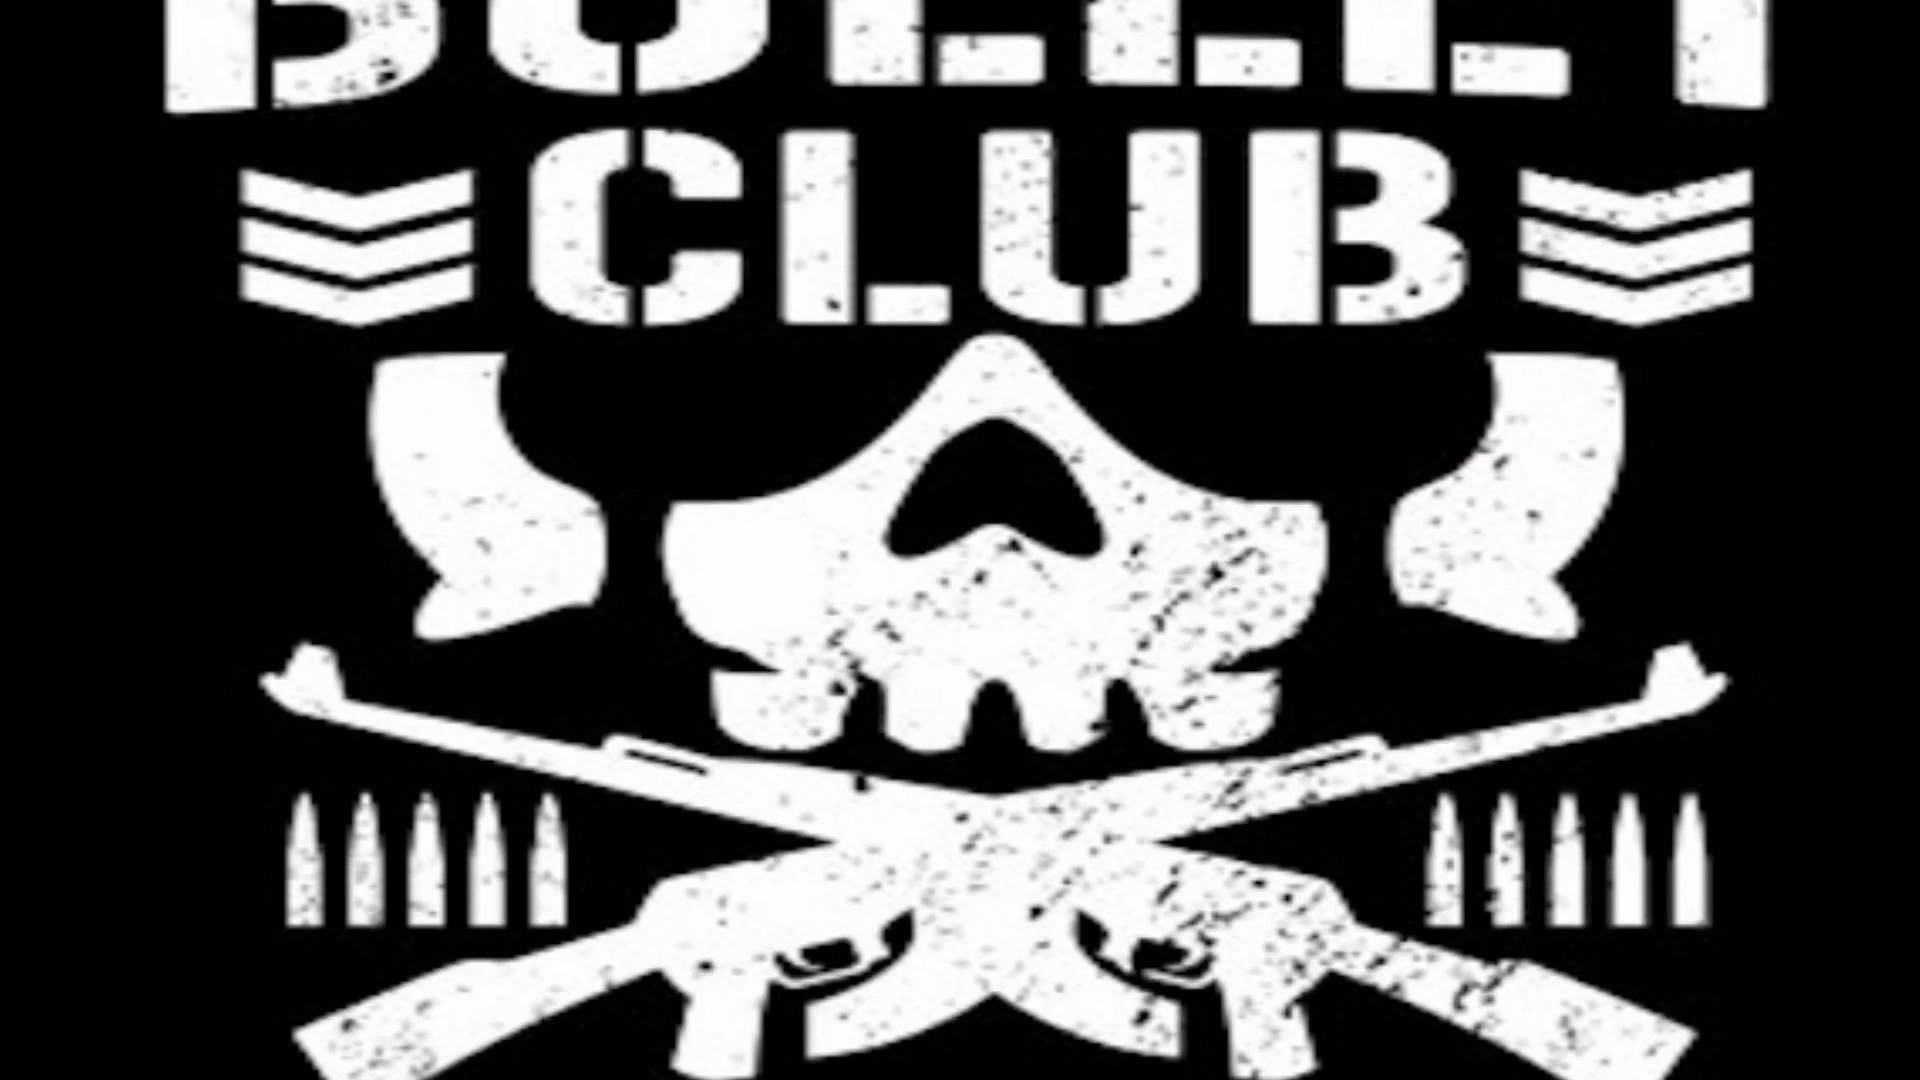 Bullet Club Posters for Sale  Redbubble